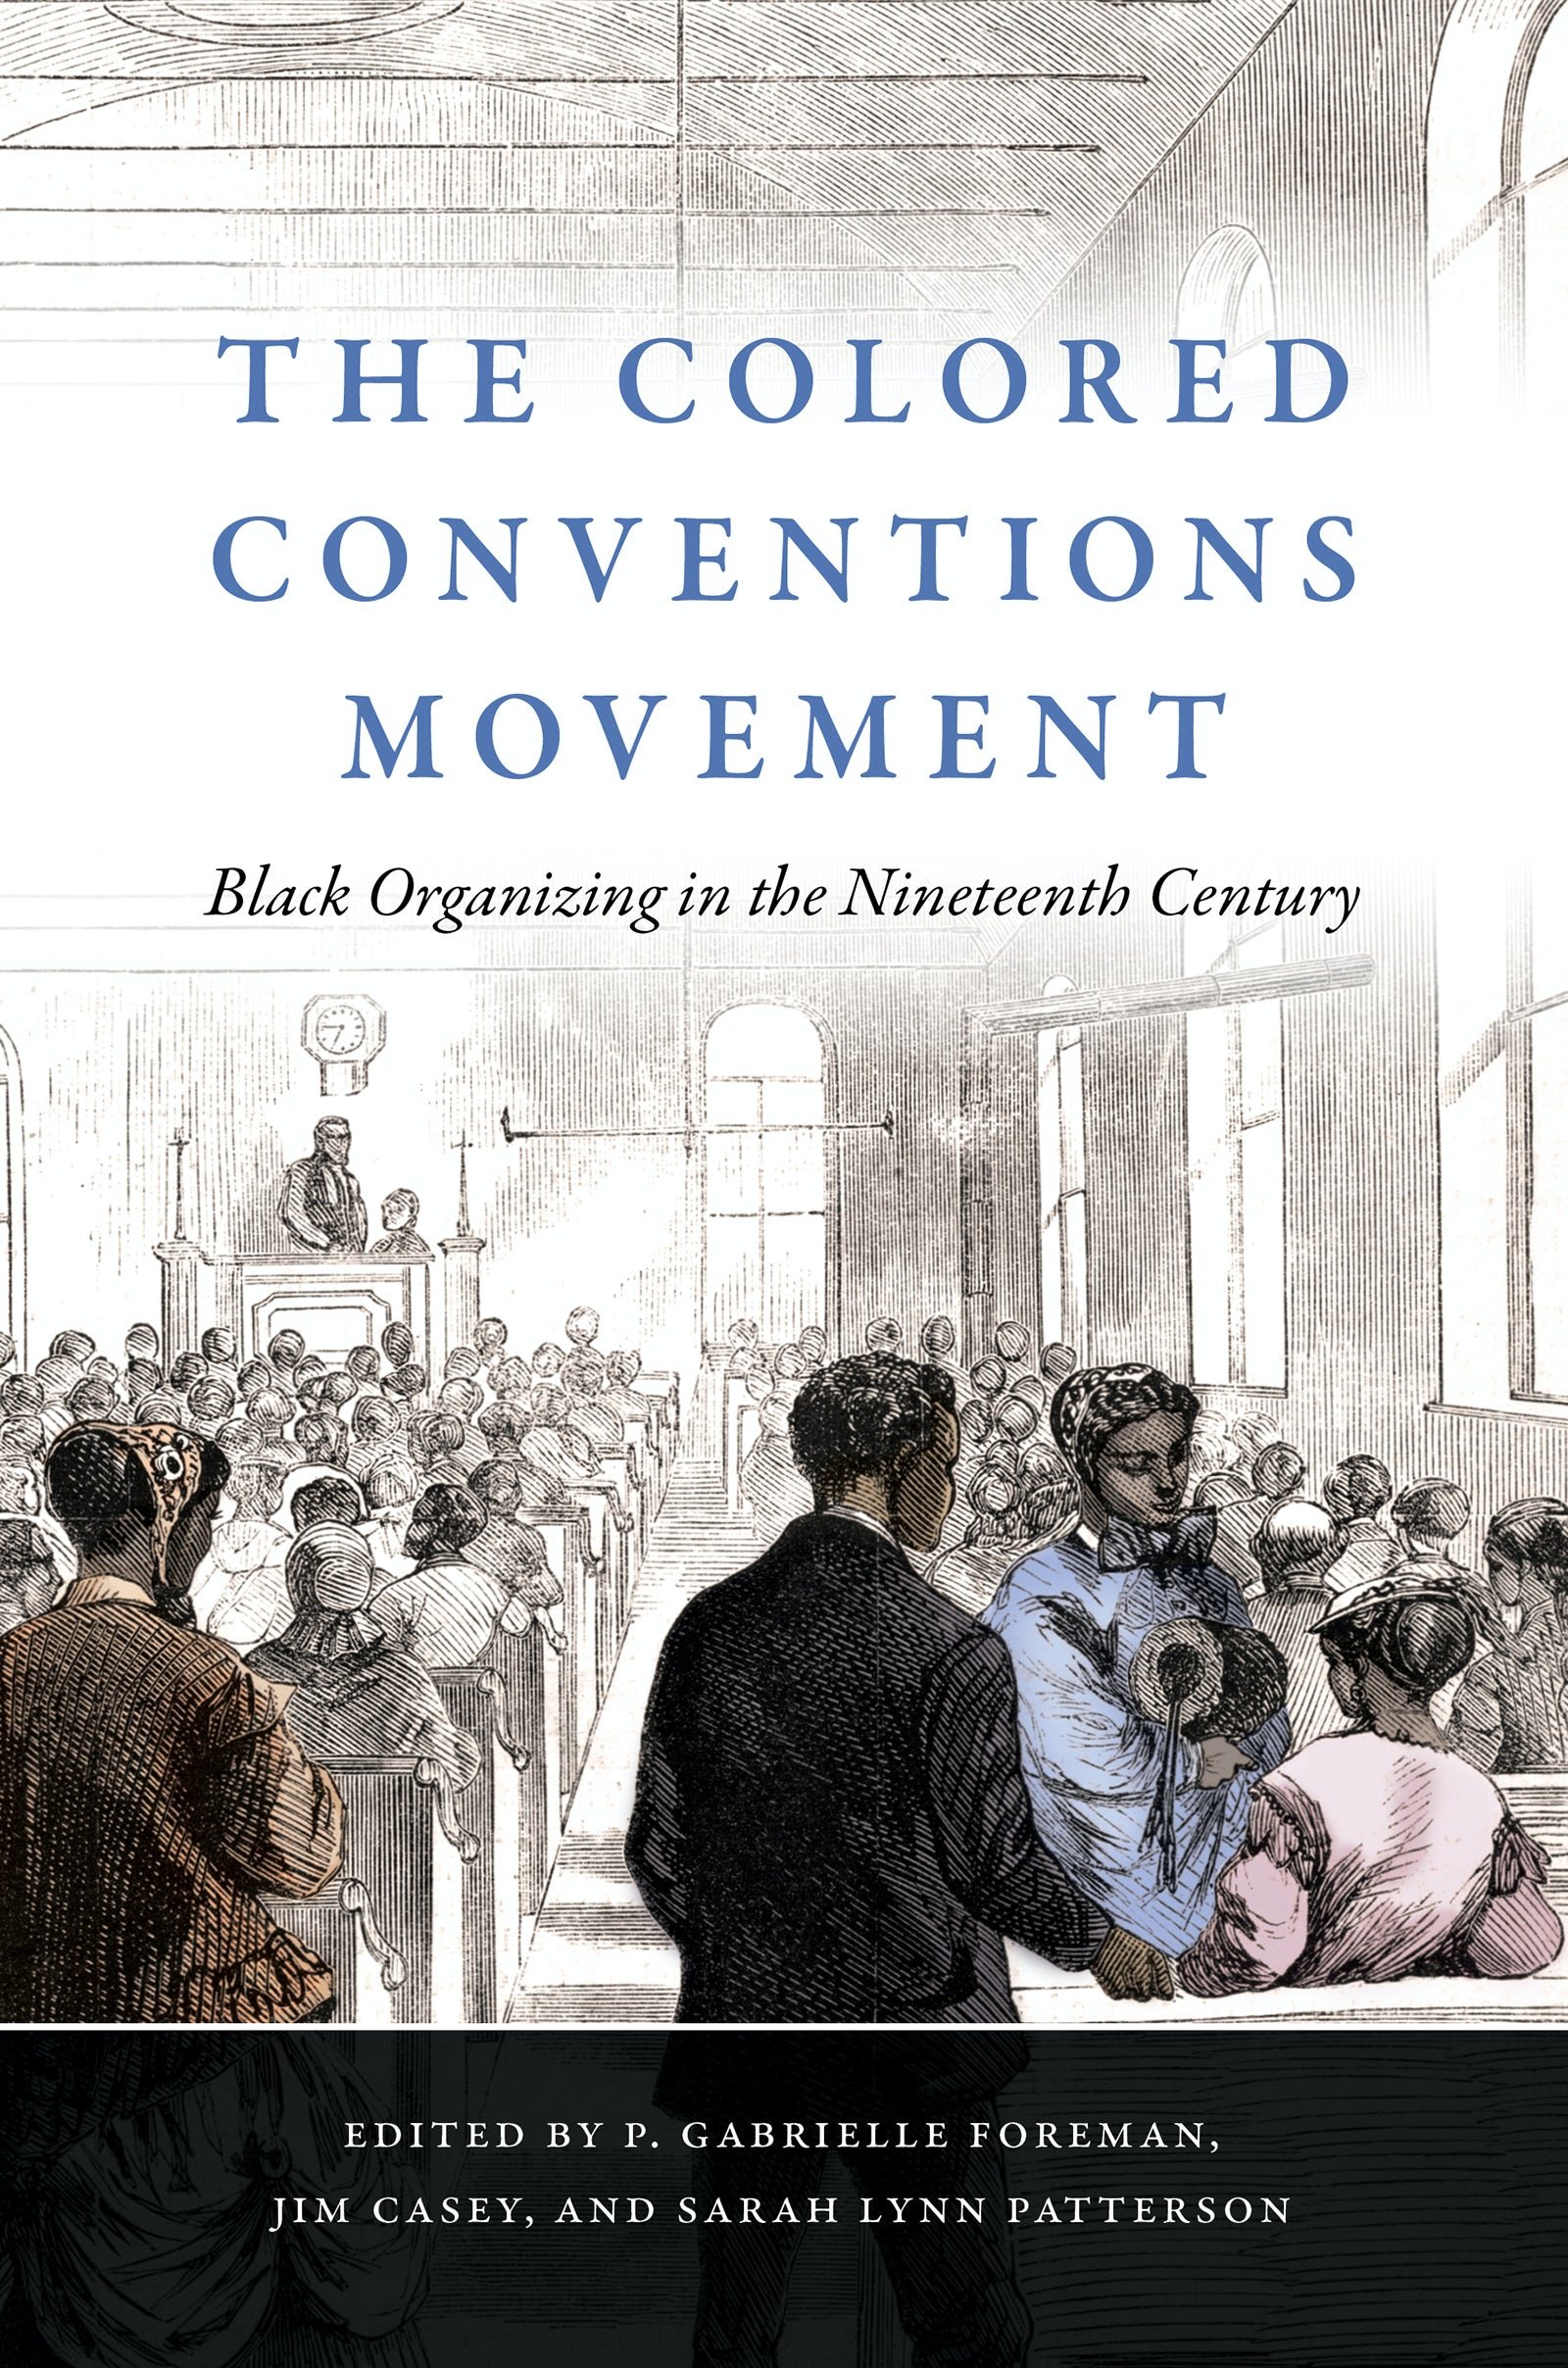 Colored Conventions book cover.jpg